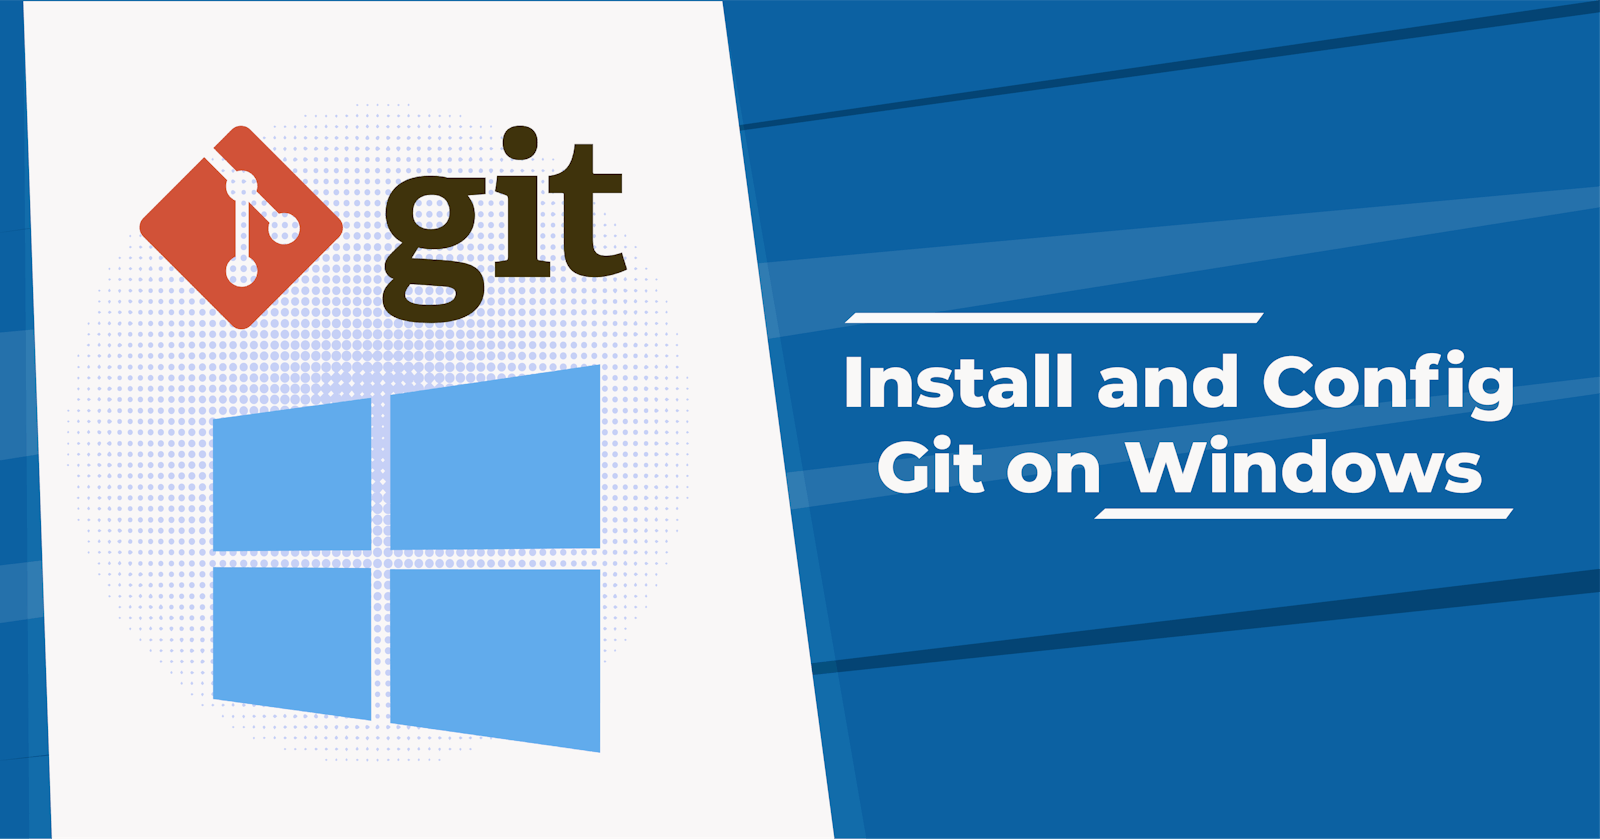 Introduction to Git; how to install Git, configure and use it on Windows.